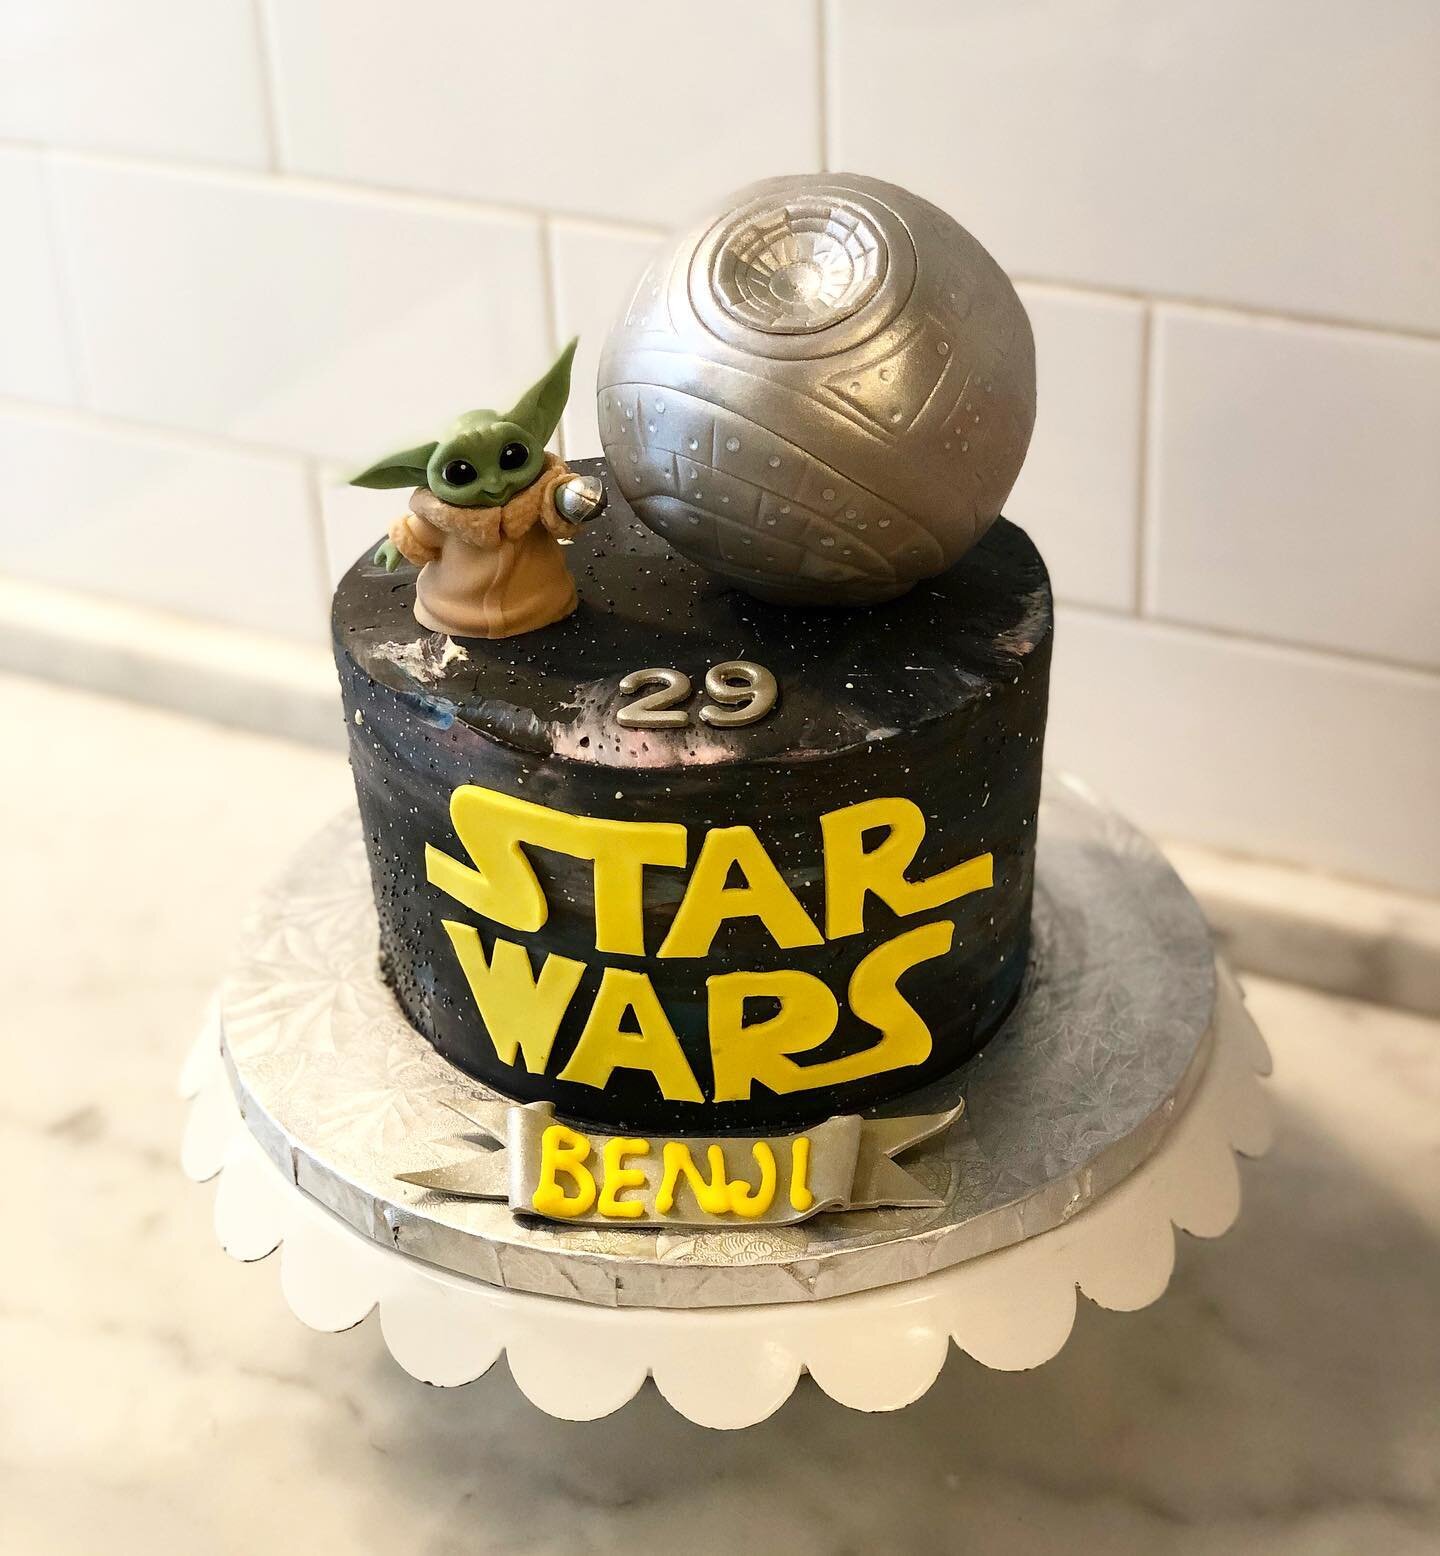 This cake is out of this world! ☄️✨💥